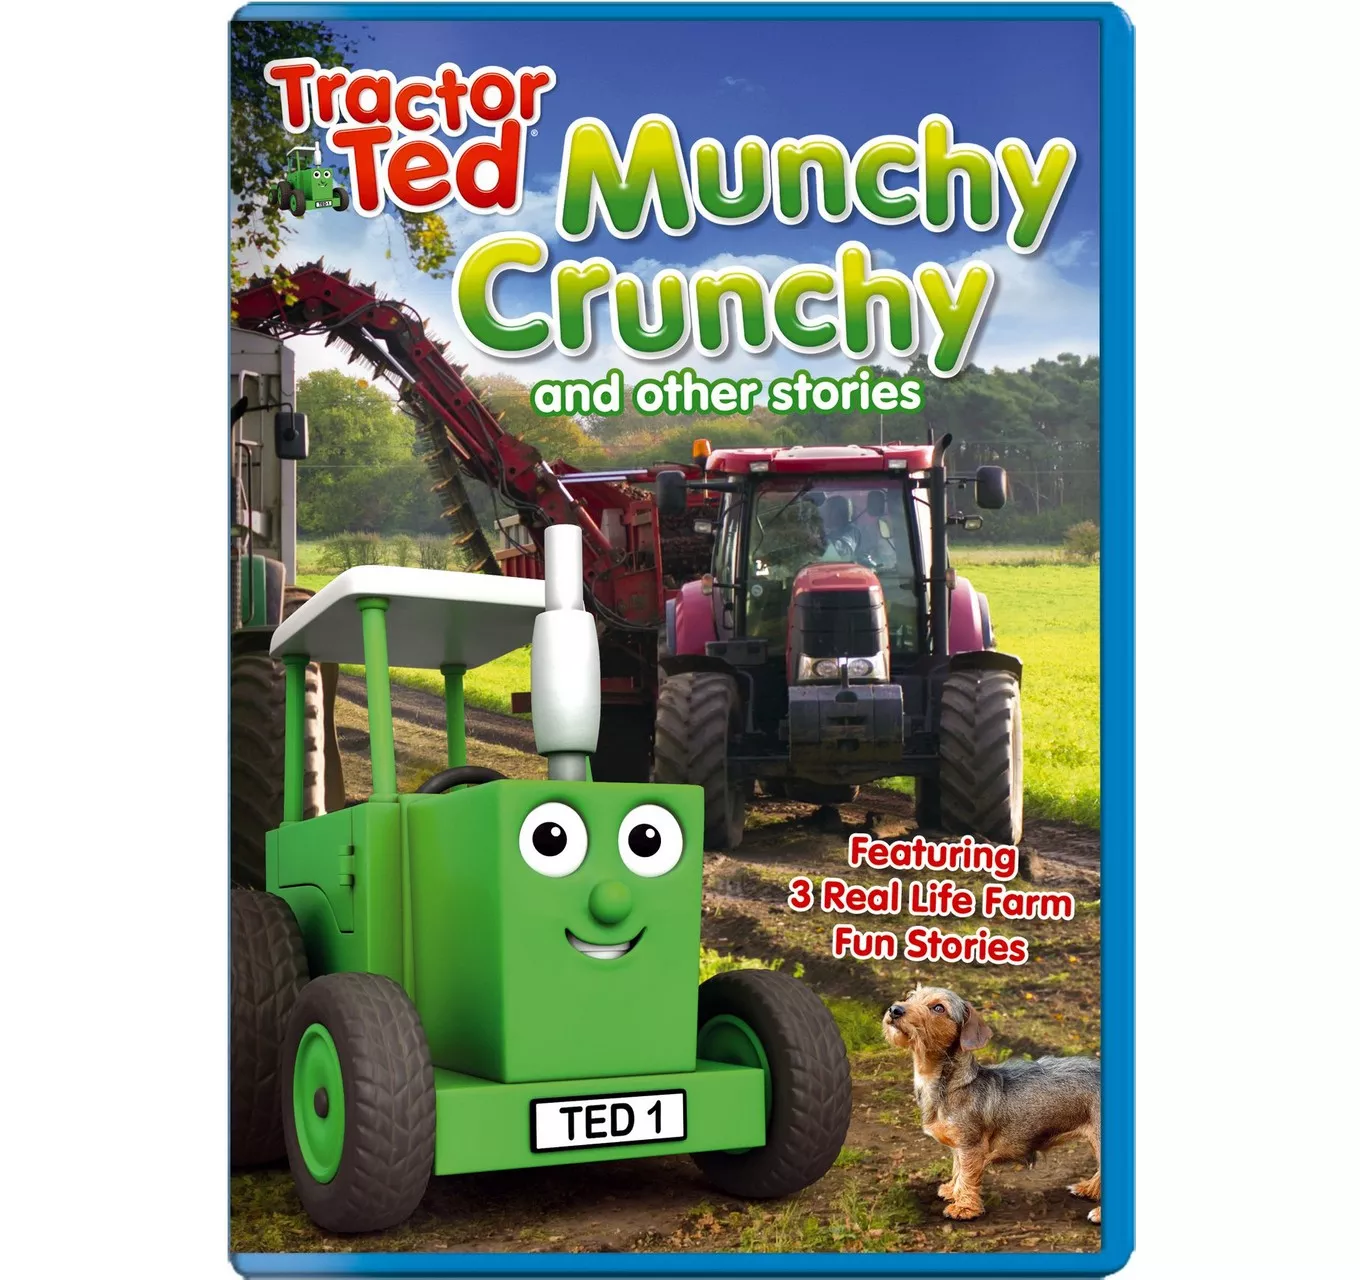 Tractor Ted Munchy Crunchy